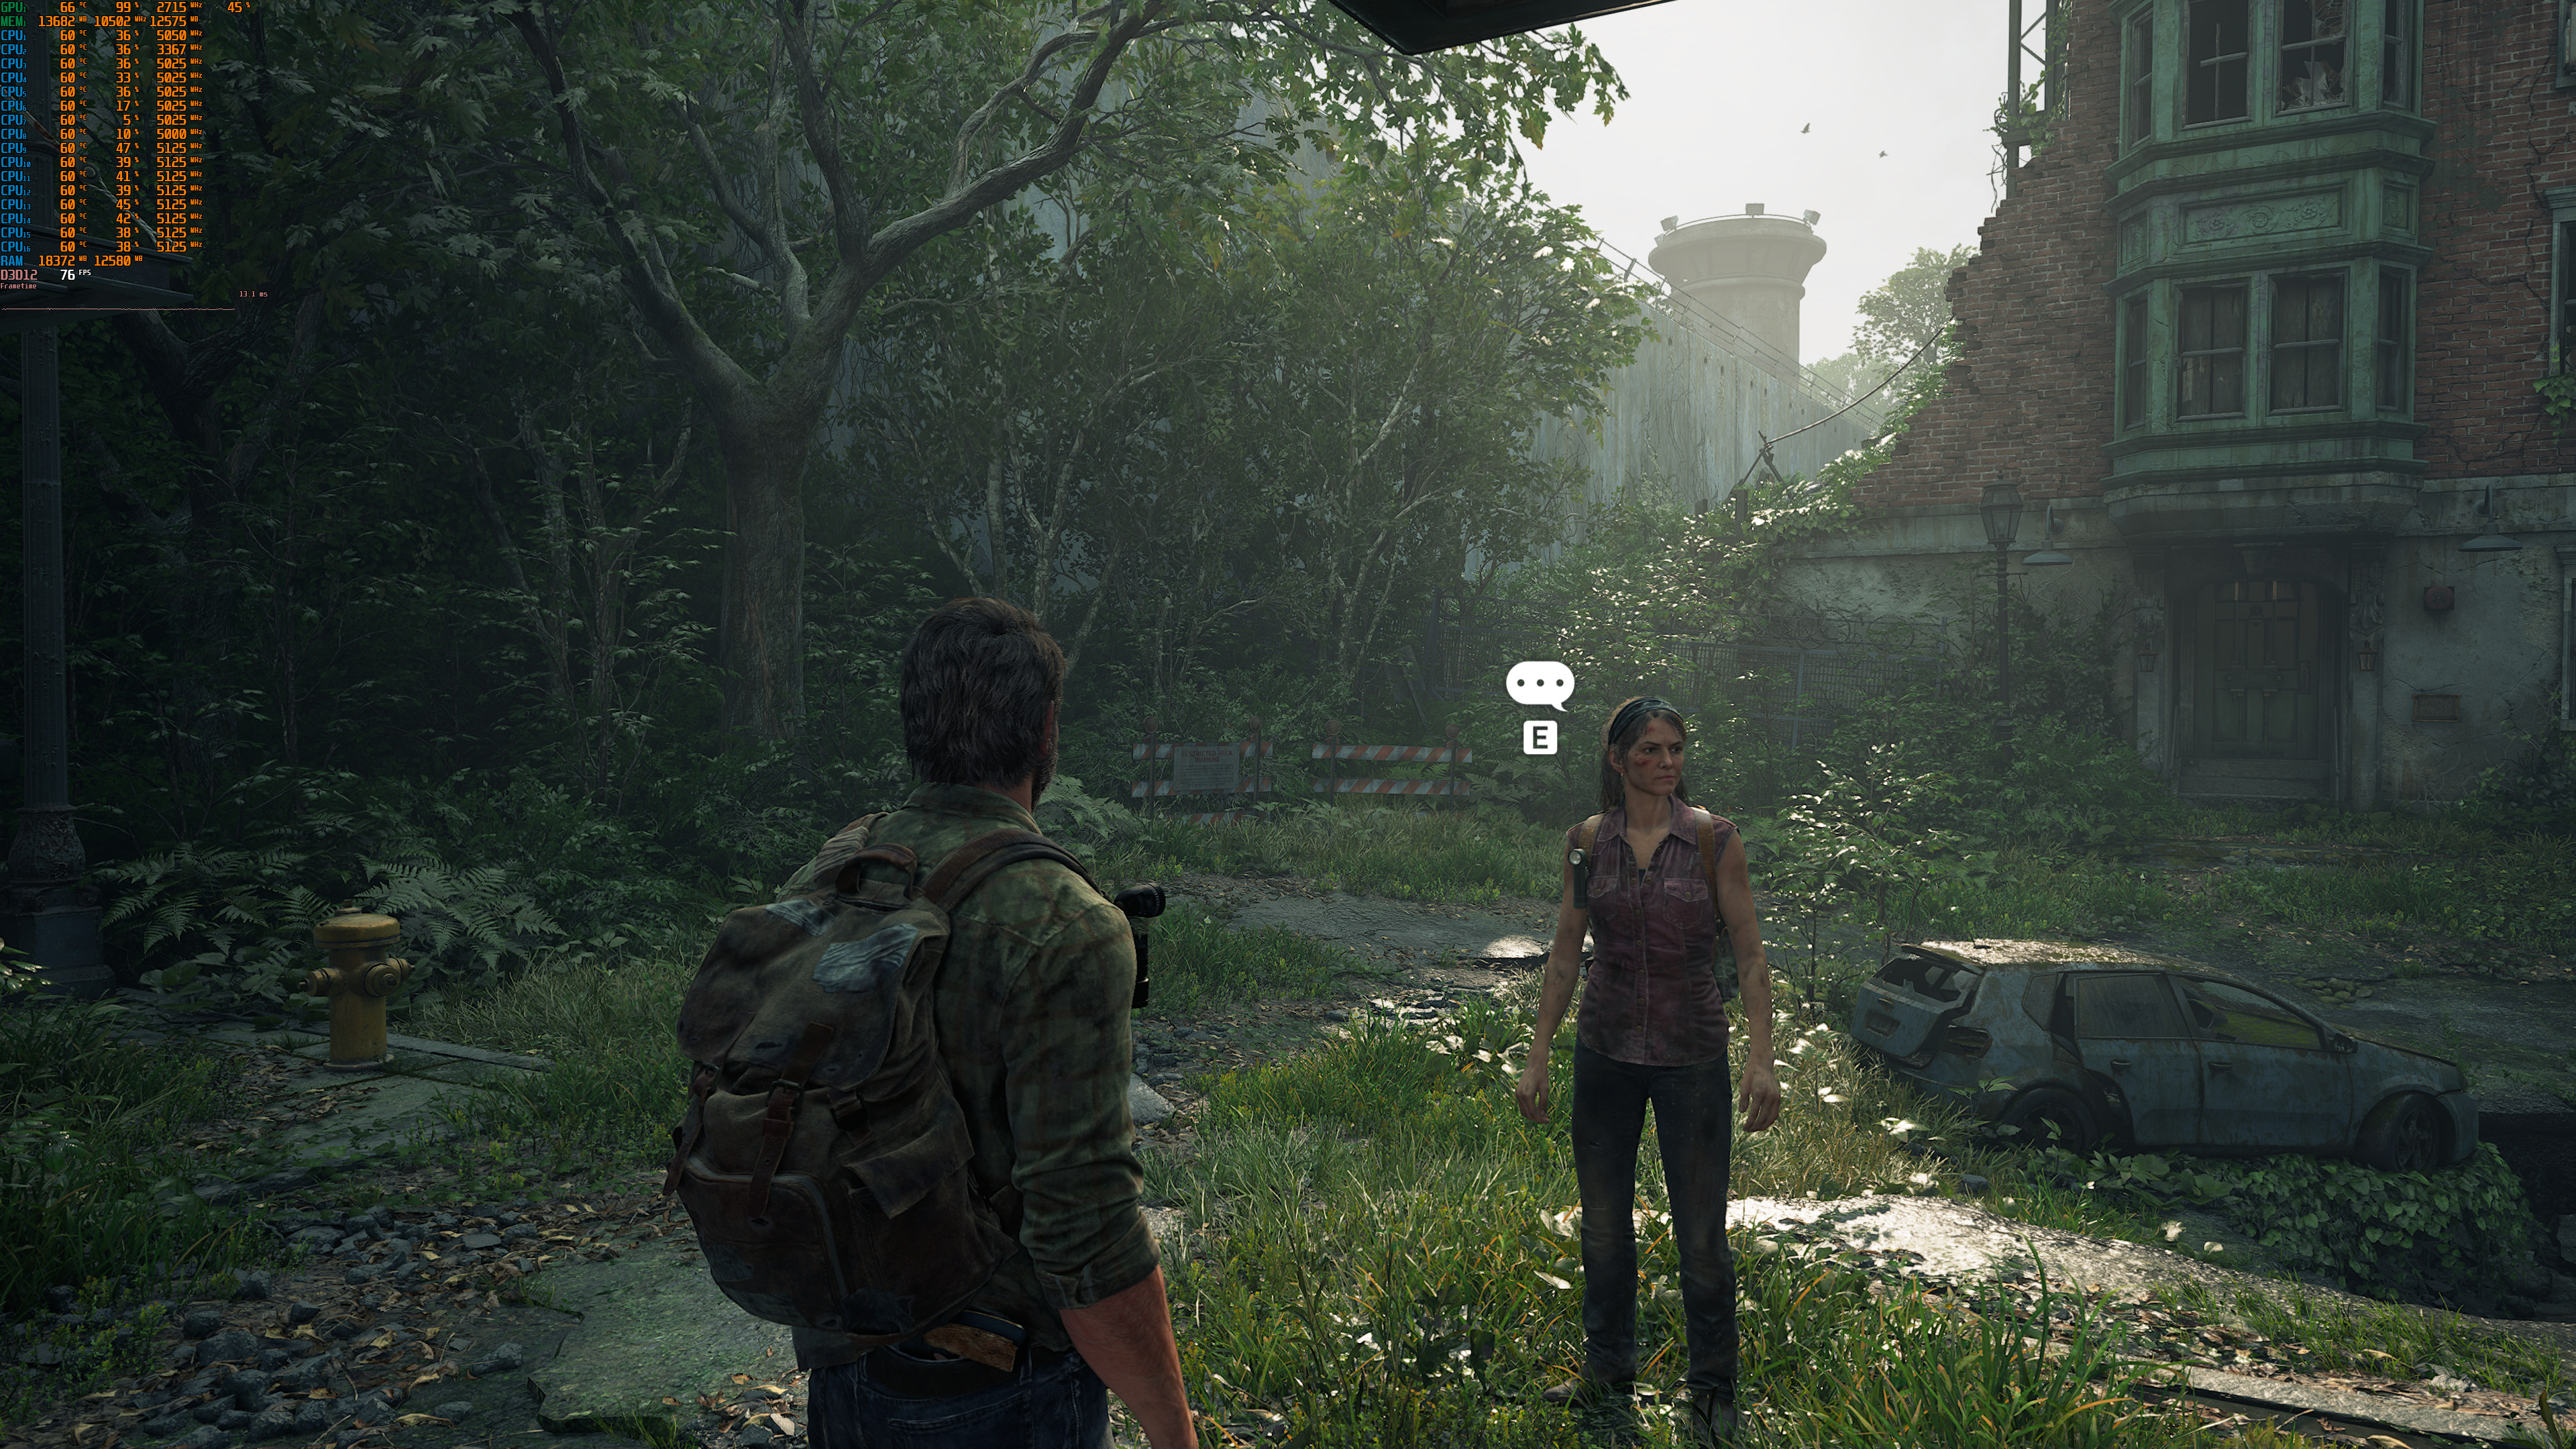 4K] 38 Wallpapers / Screenshots from The Last of Us Part 2 Reveal